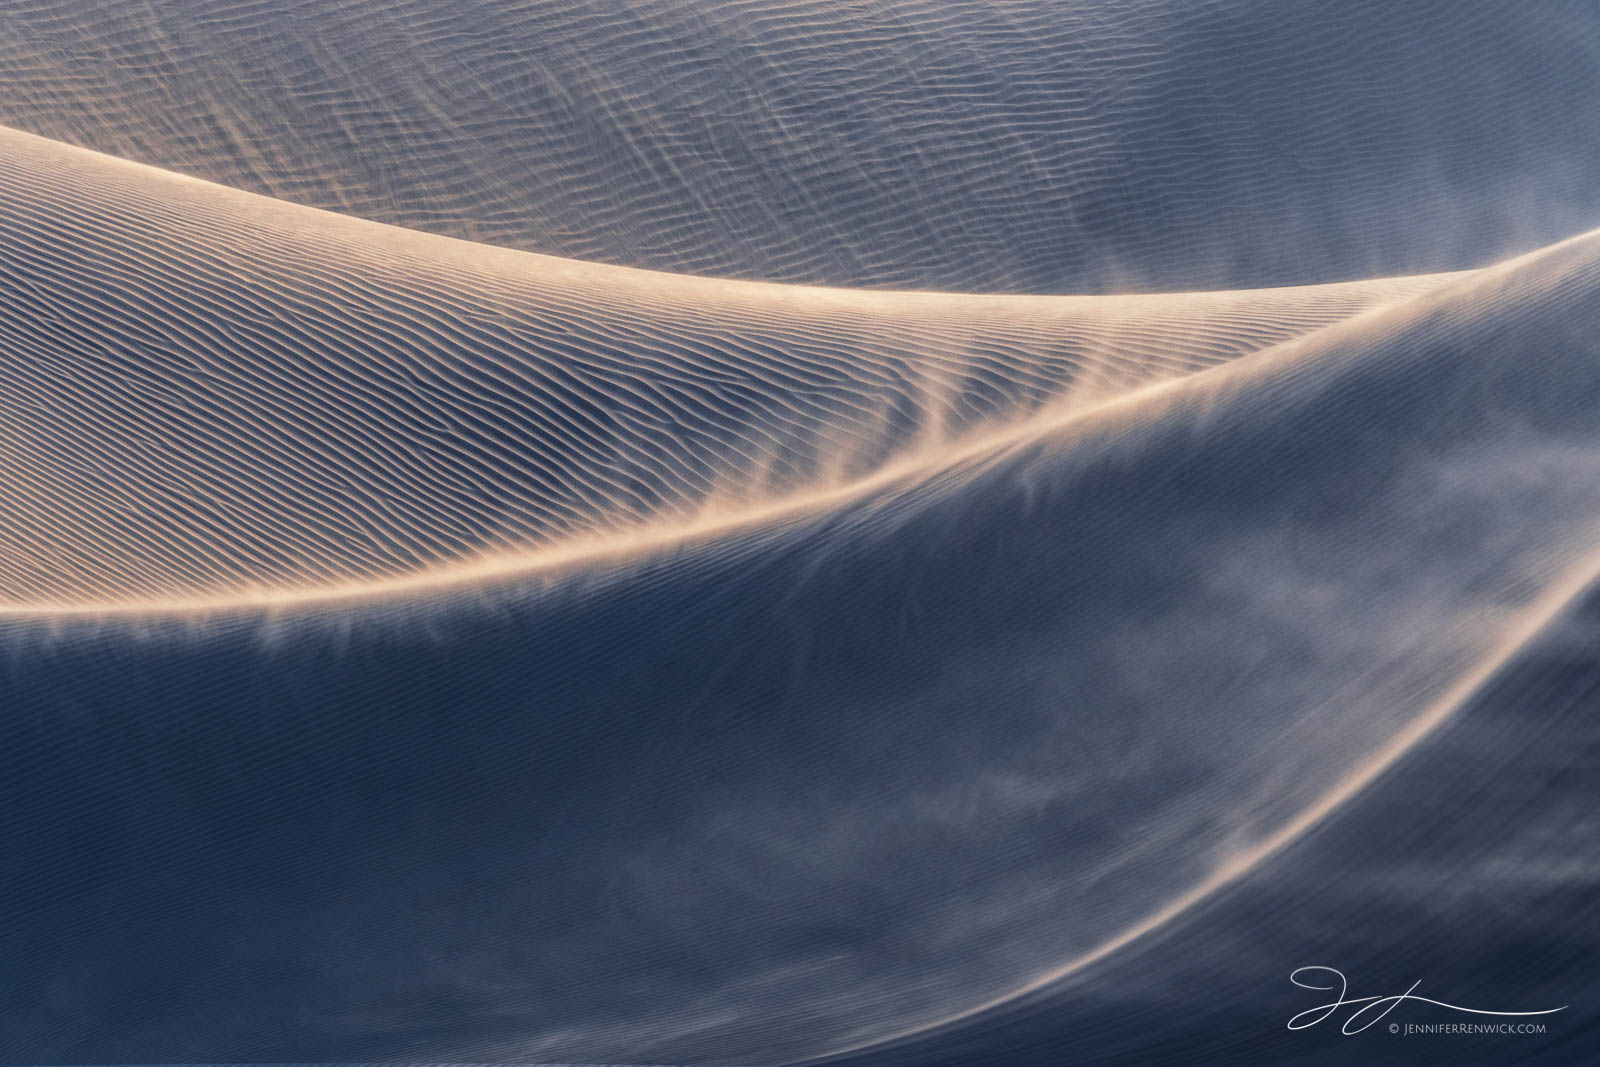 Wind reshapes the surface of a set of dunes during a late afternoon windstorm.